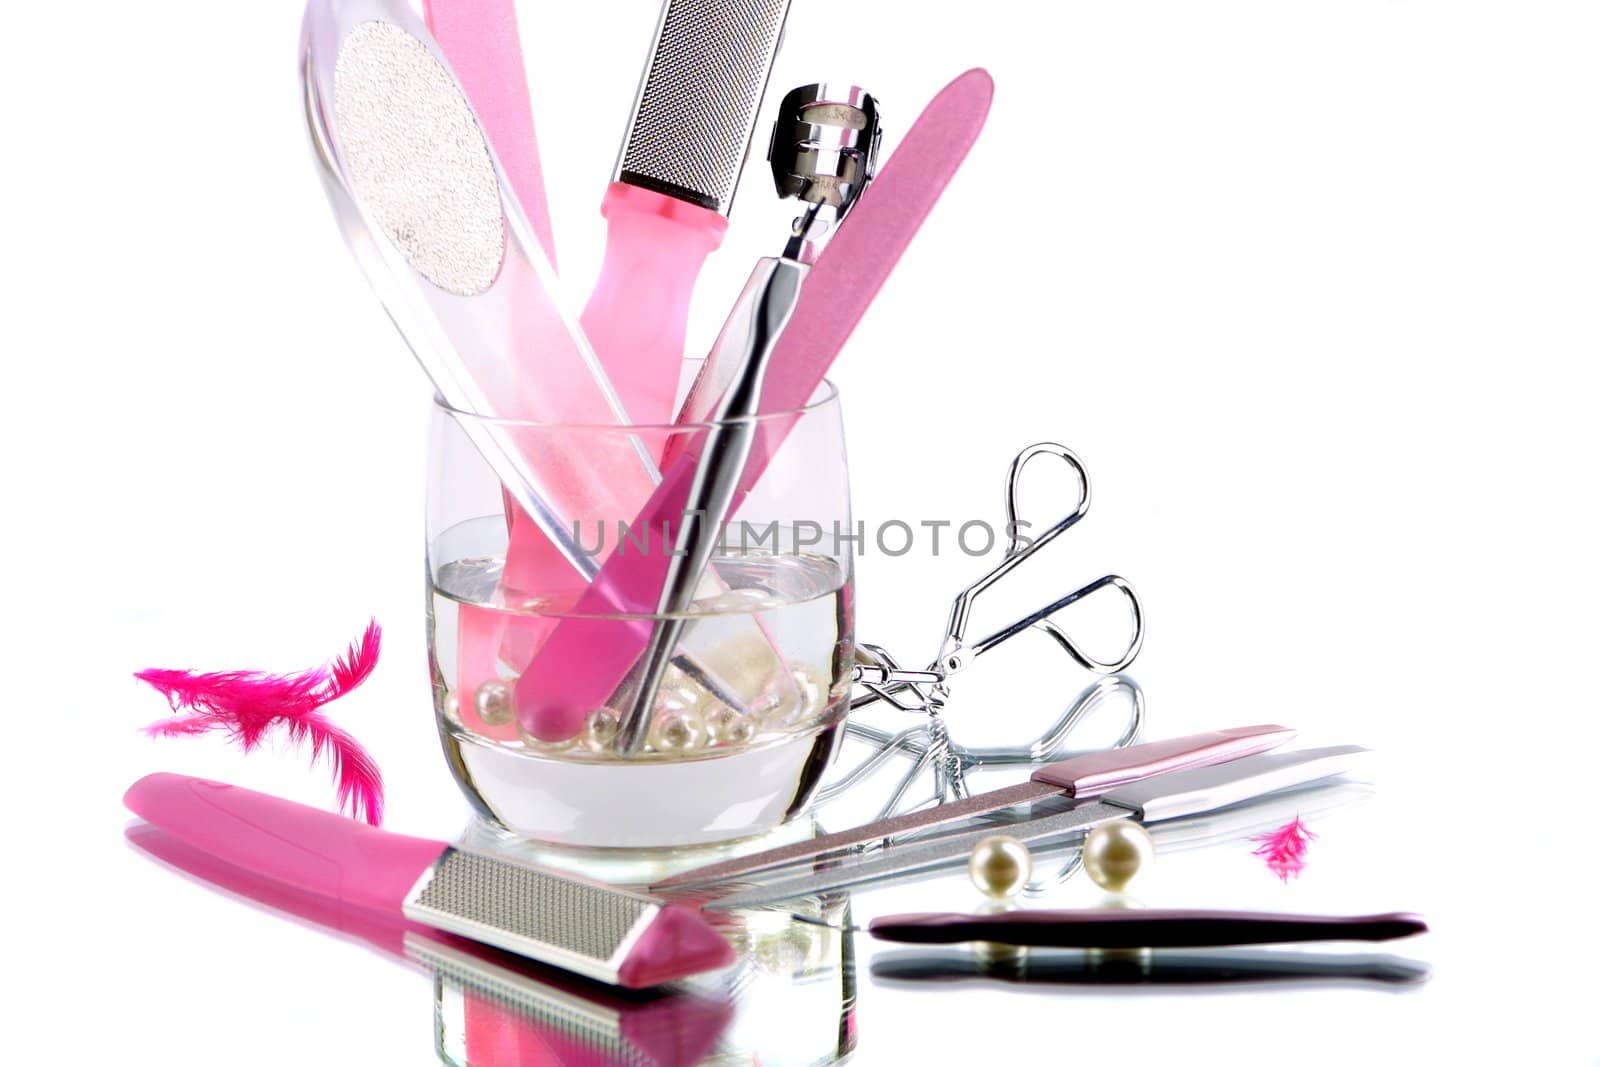 accessories for pedicure on glass